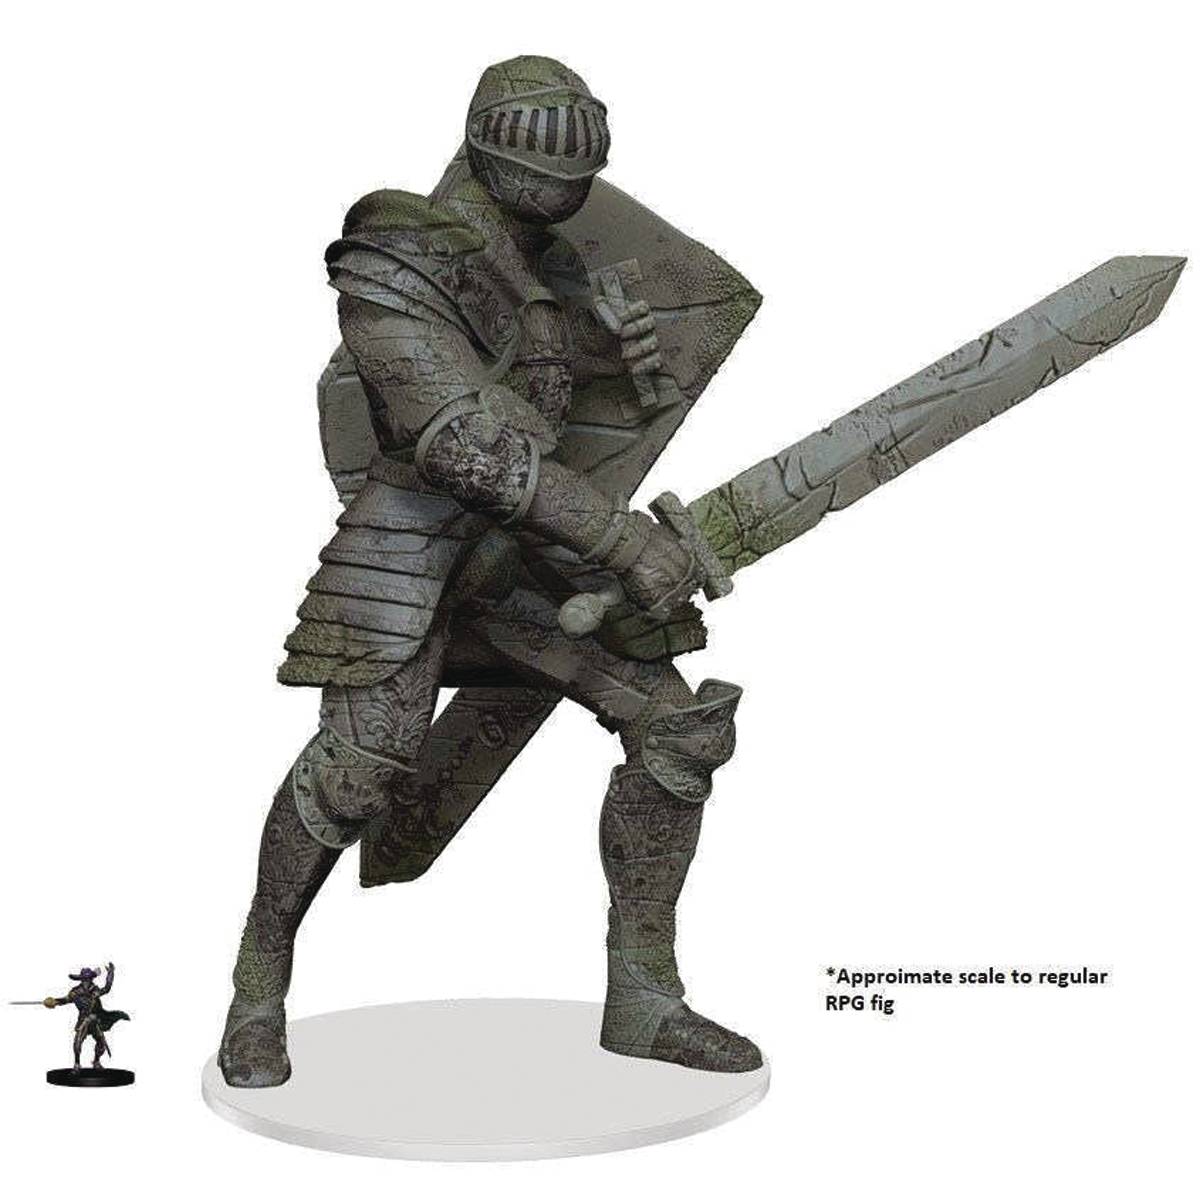 D&D ICONS REALM MINIATURES WALKING STATUE WATERDEEP KNIGHT (